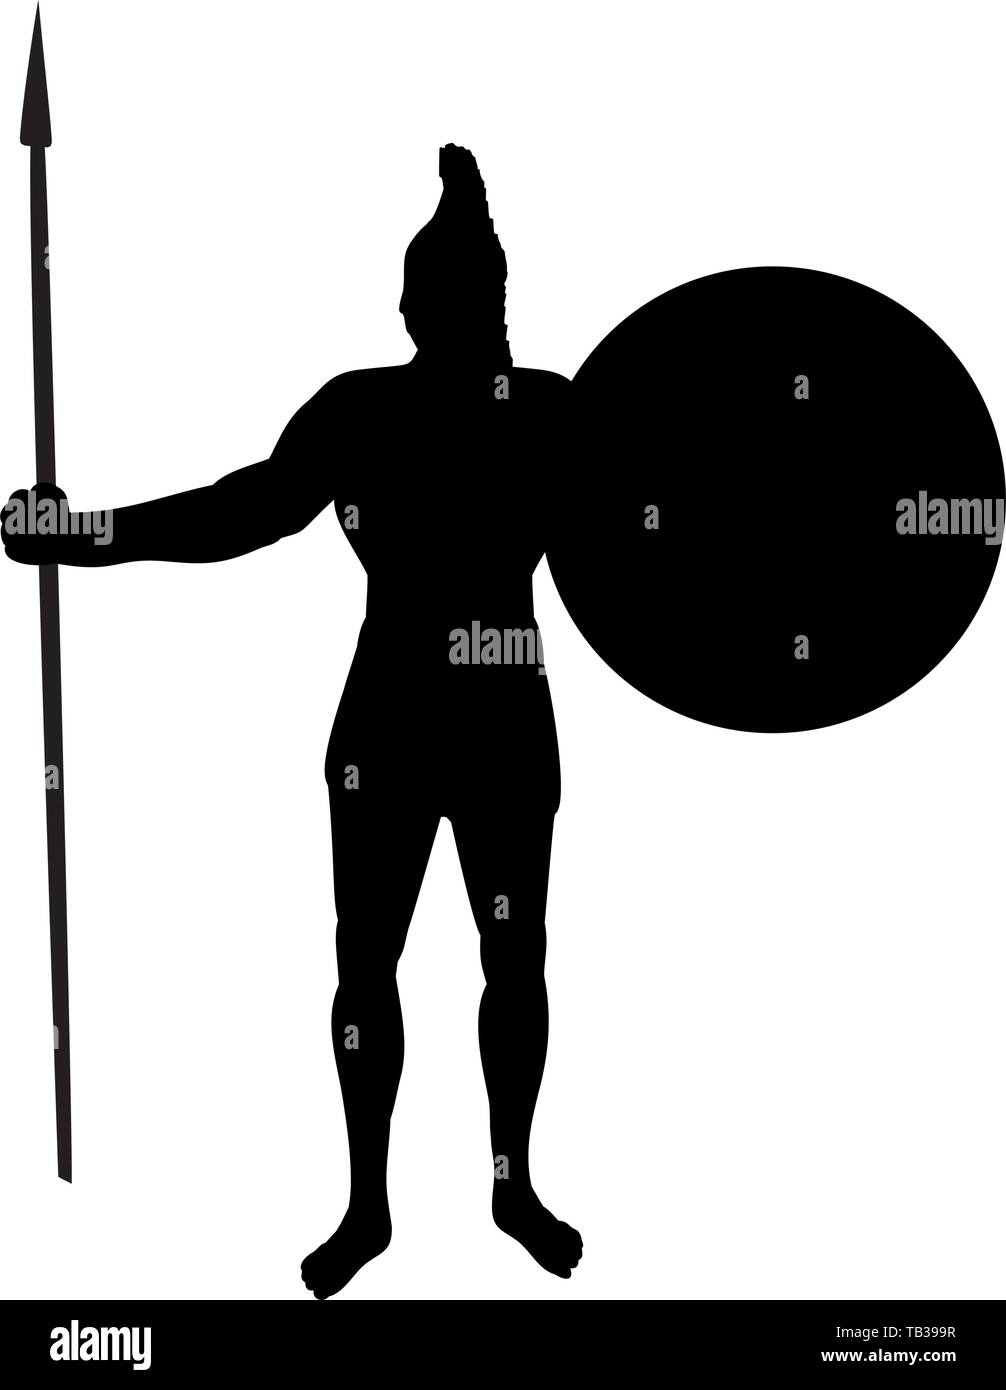 Ares god  war silhouette ancient mythology fantasy Stock Vector